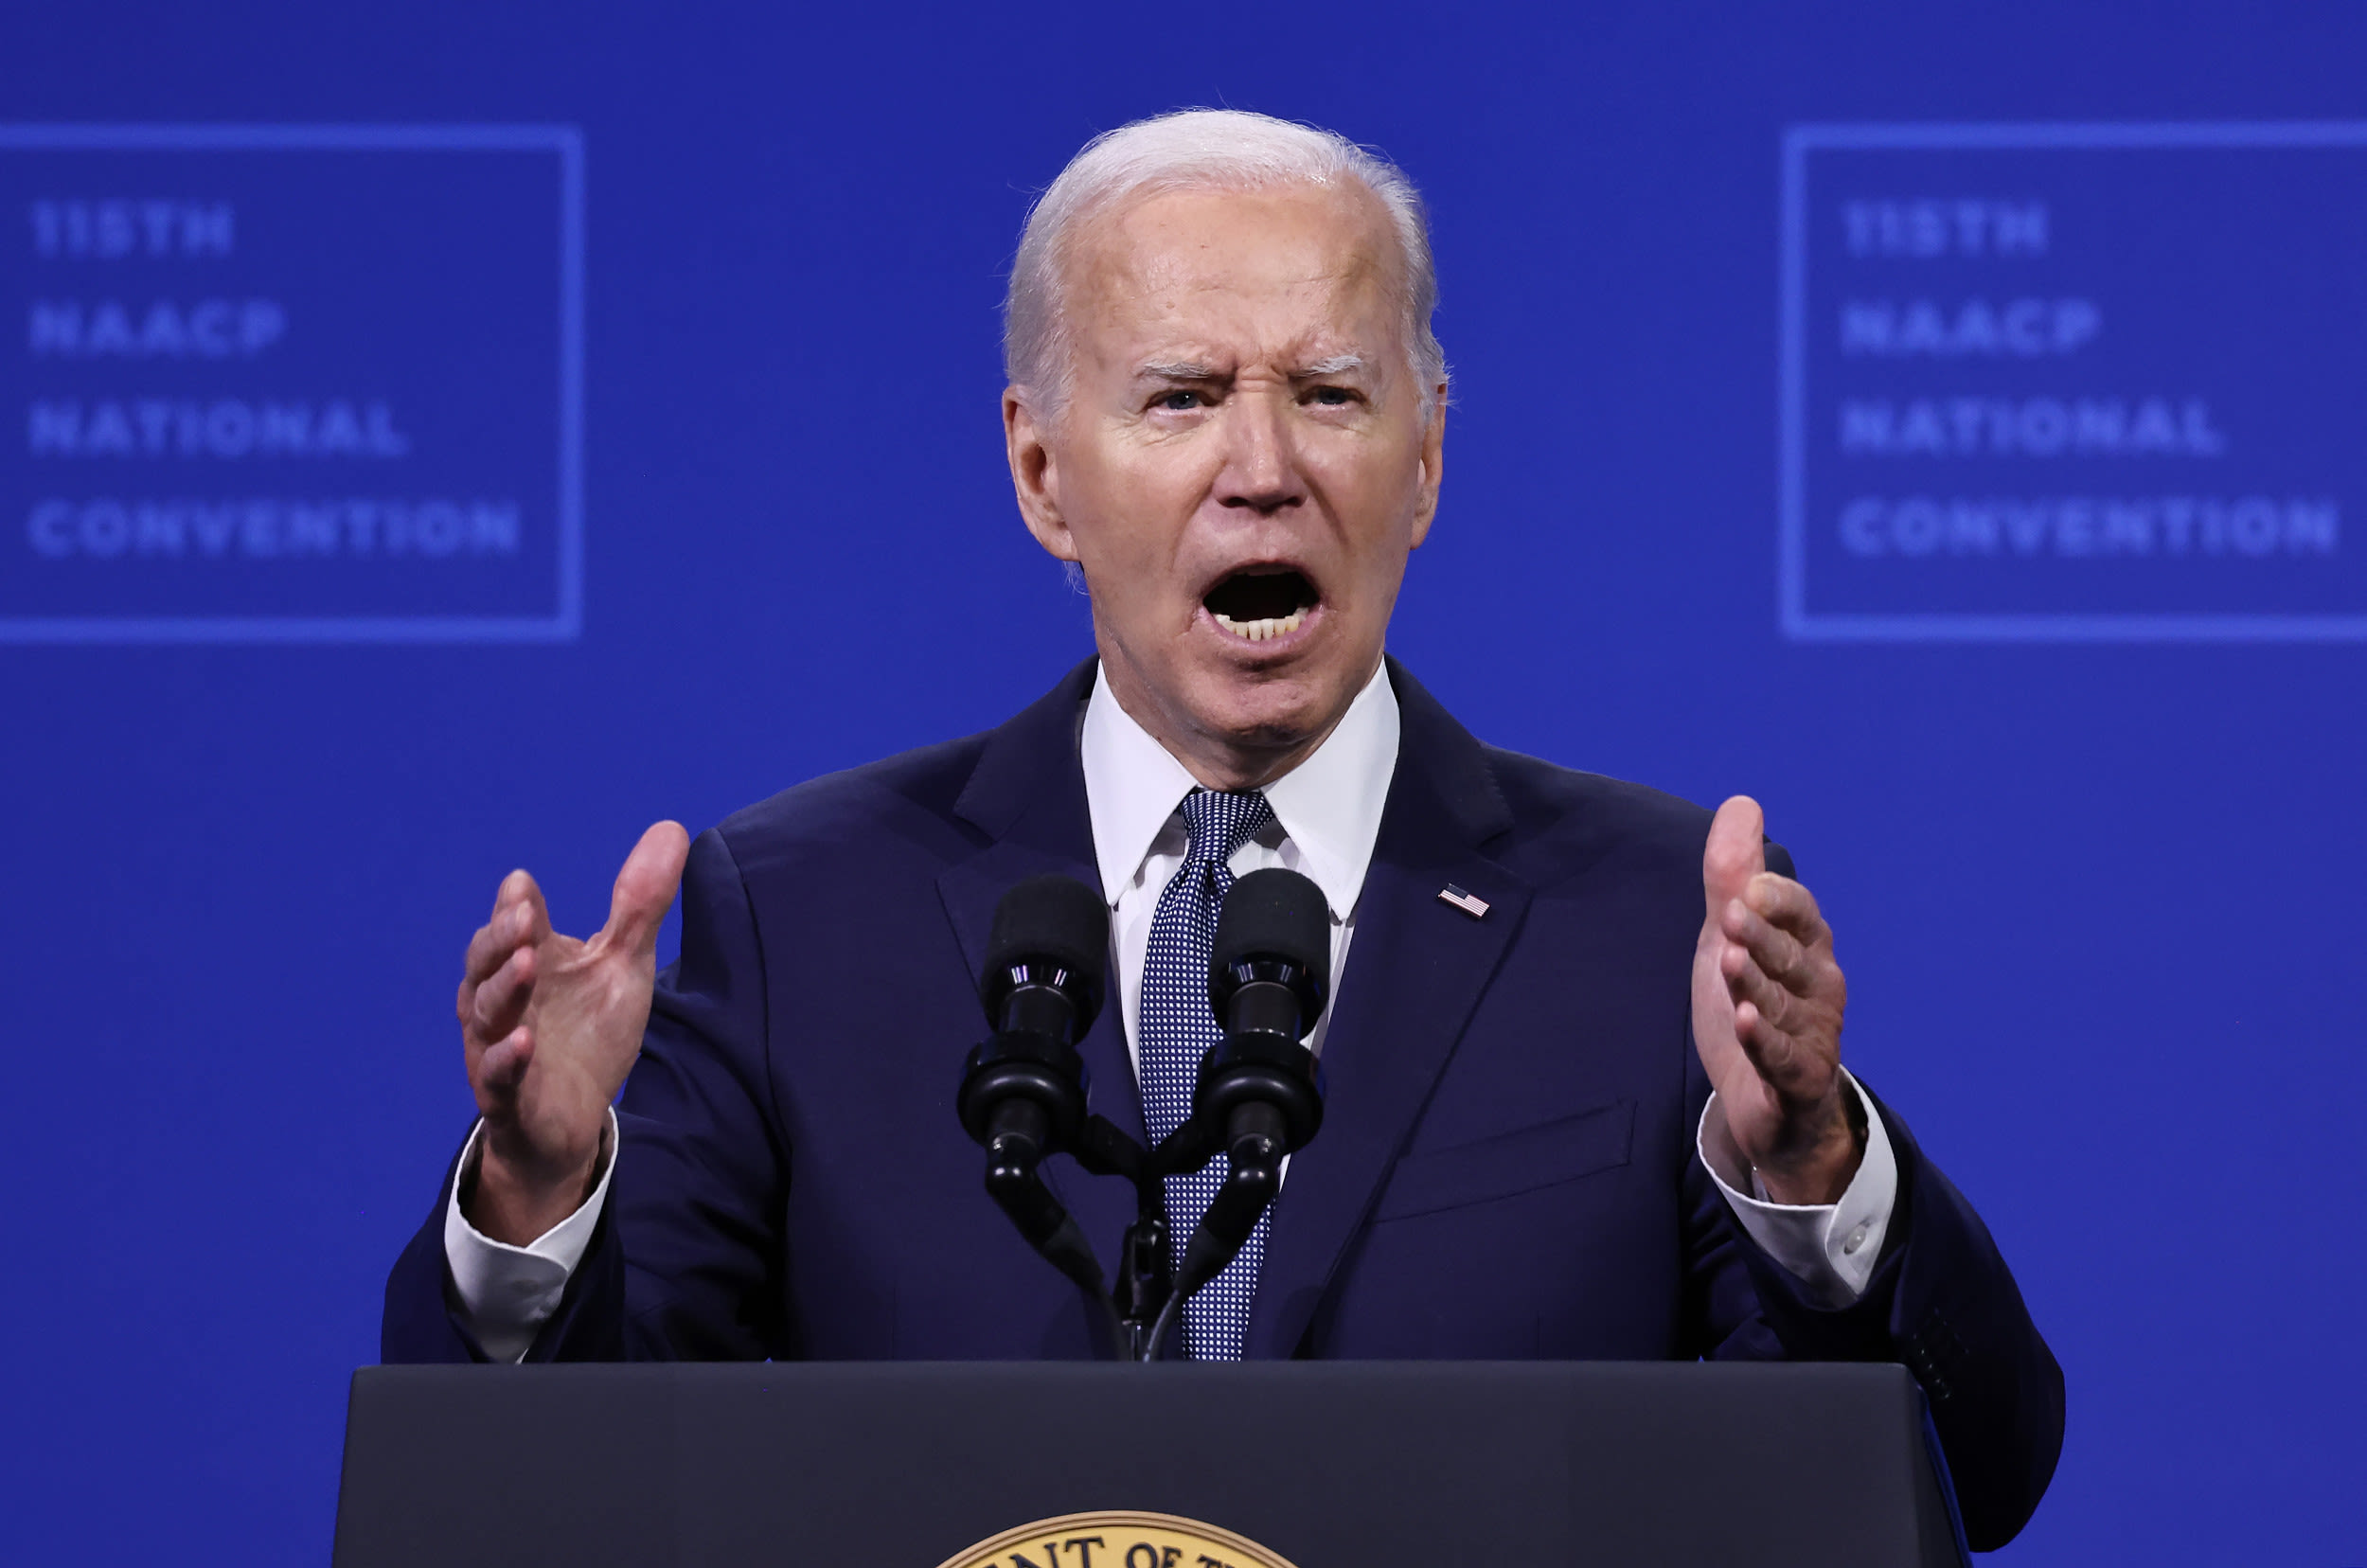 Joe Biden's chances of winning election collapse, is now fourth favorite